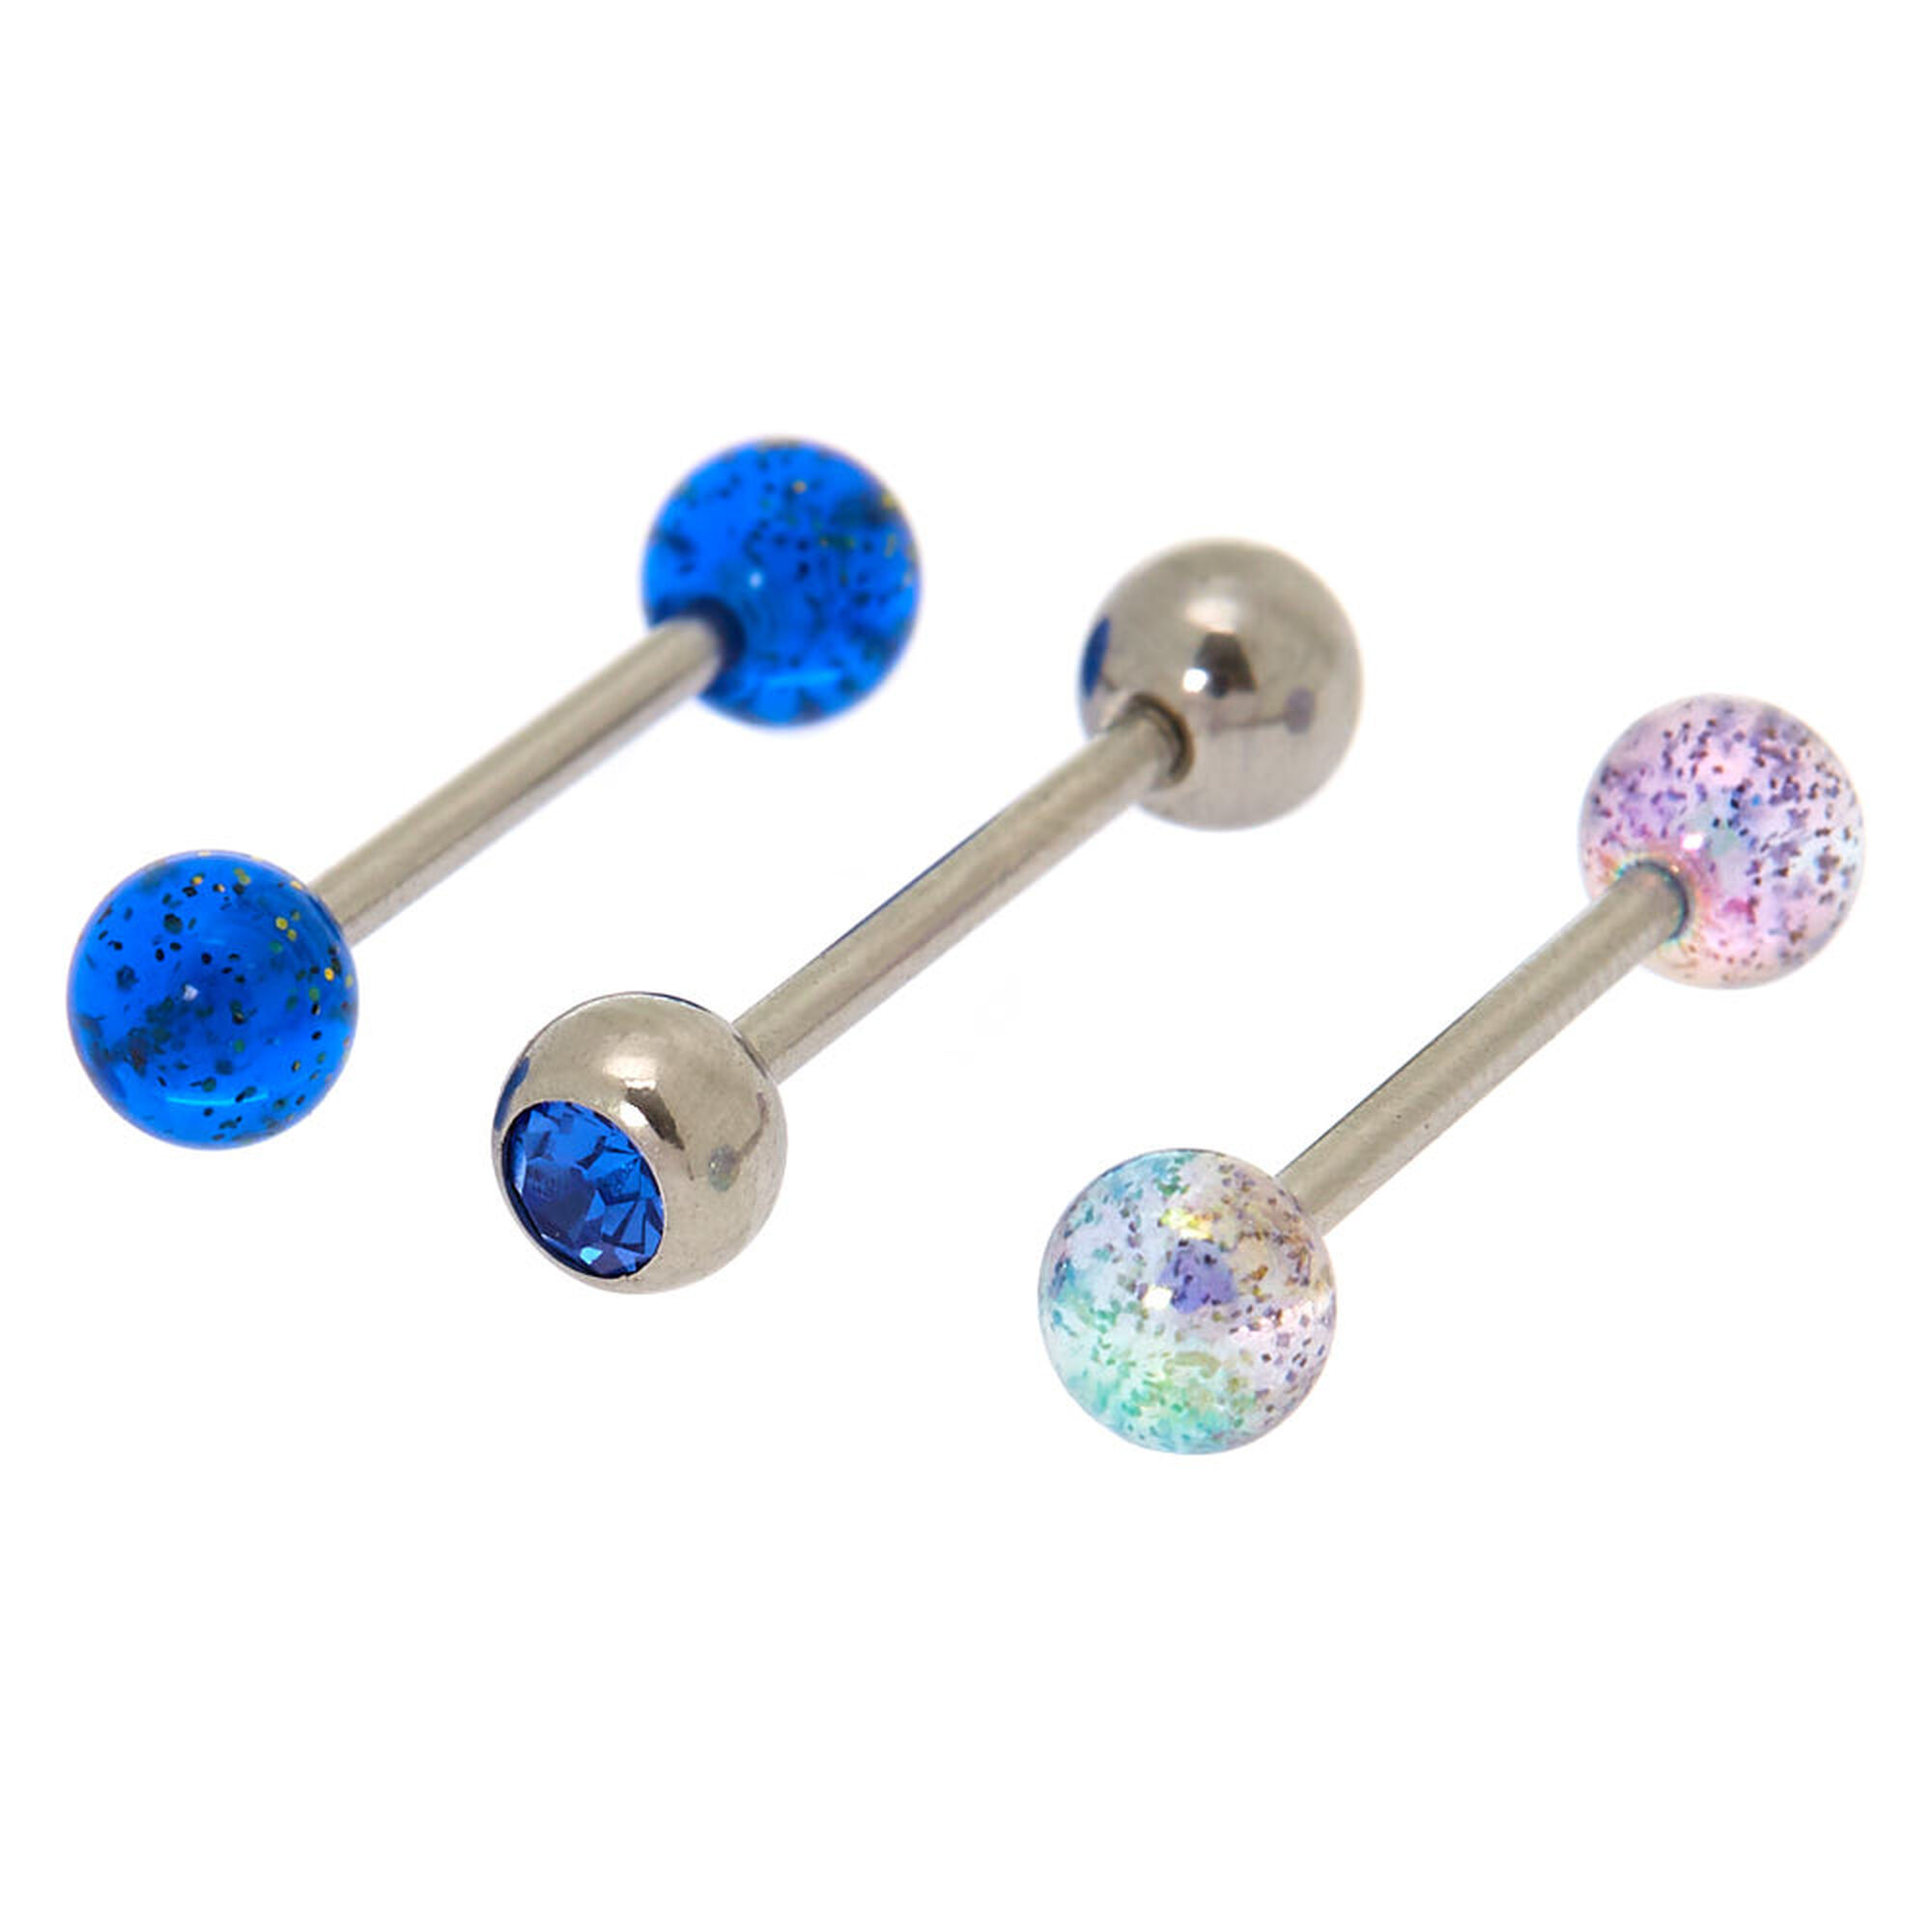 View Claires Tone 14G Mystical Barbell Tongue Rings 3 Pack Silver information